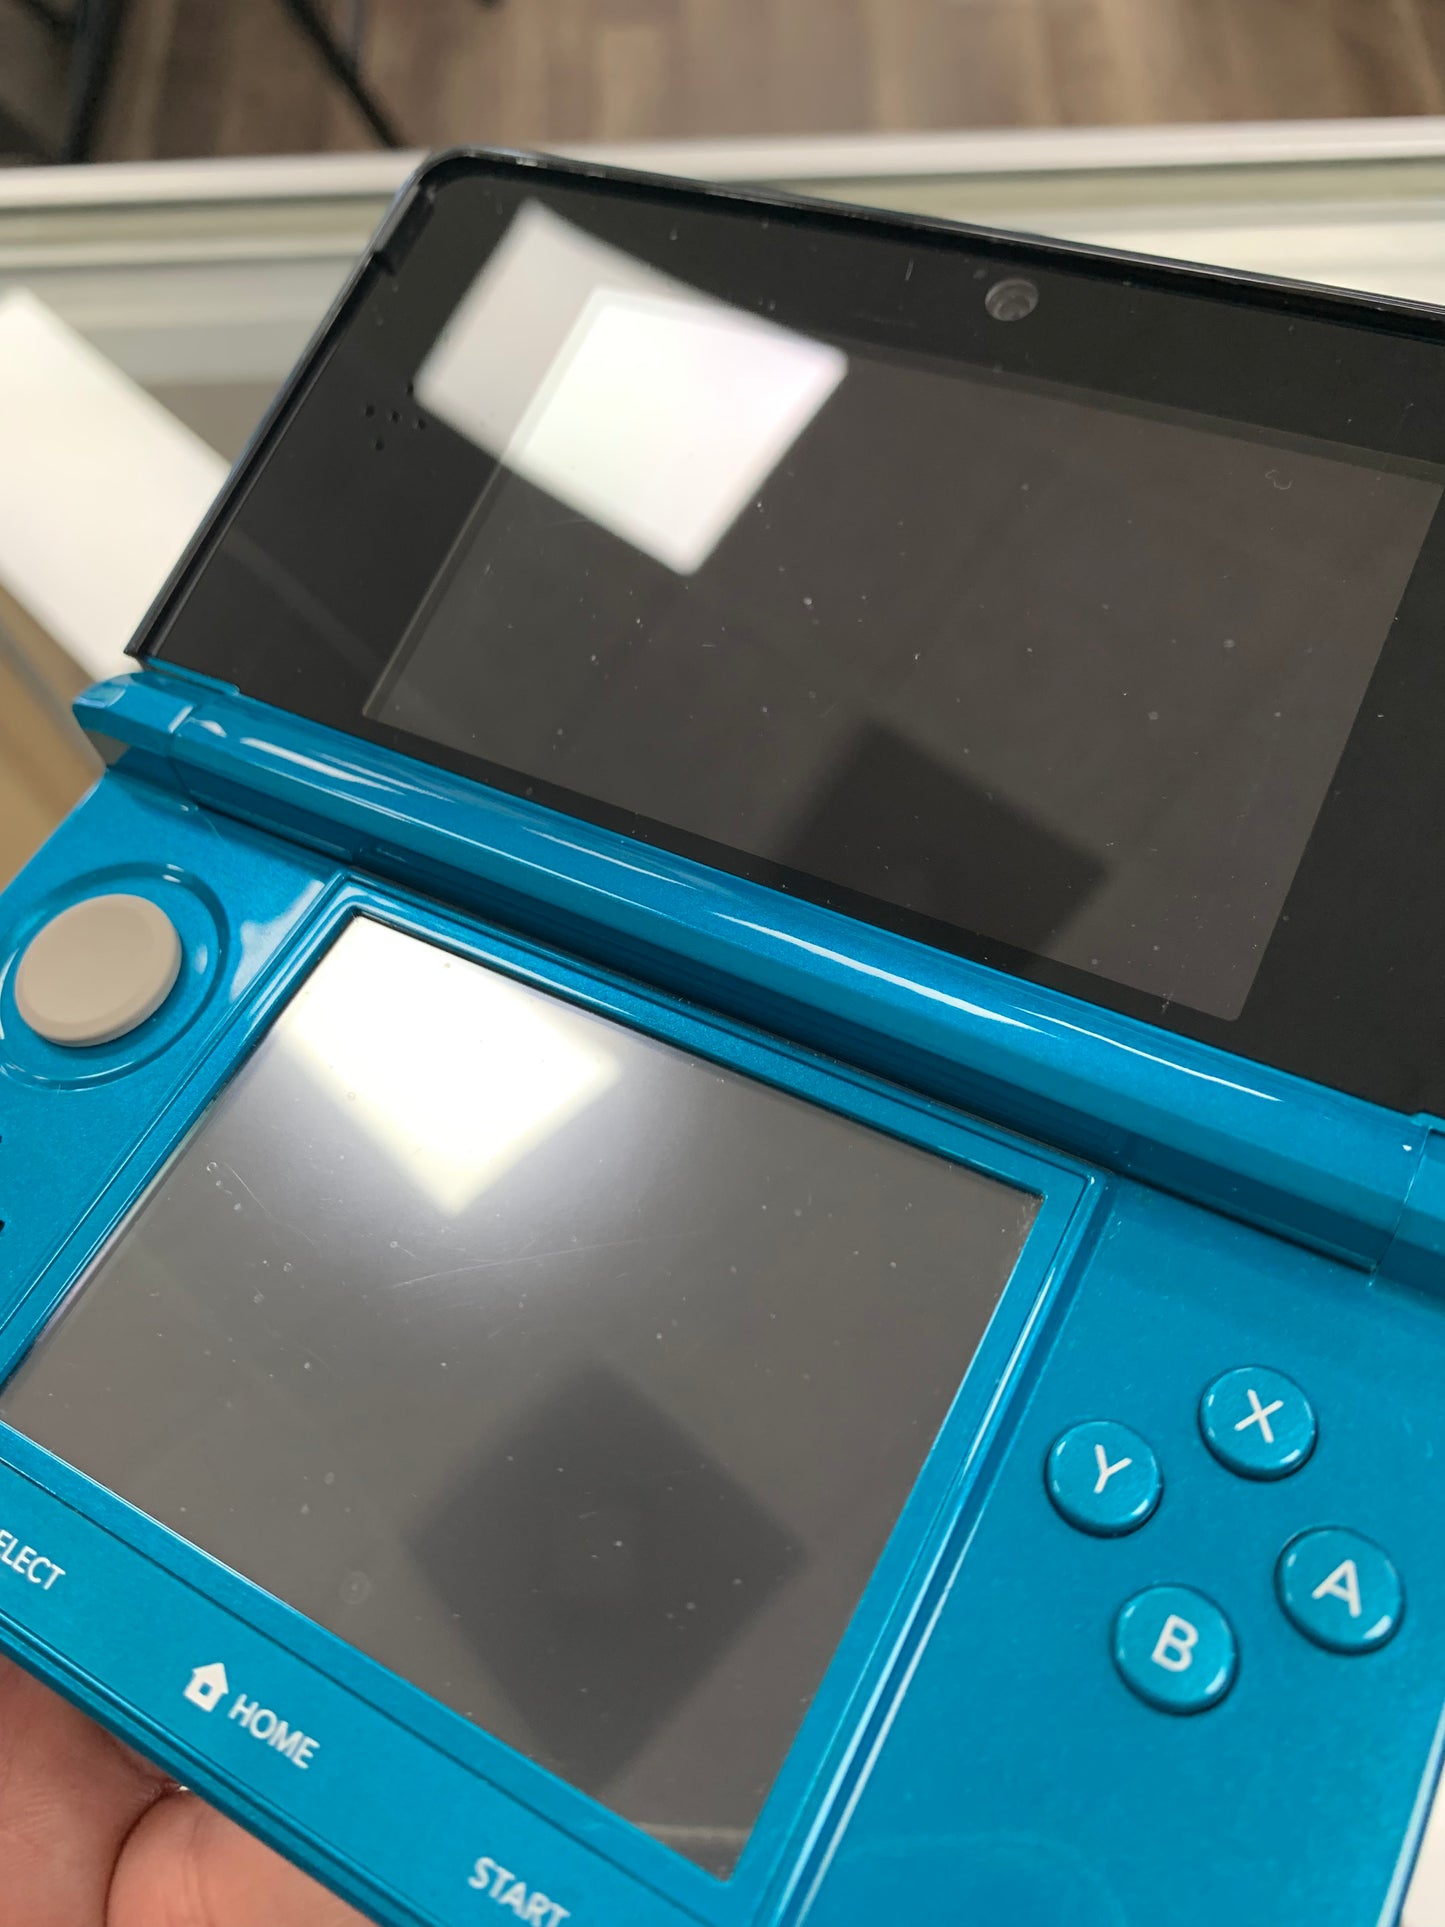 Aqua Blue Nintendo 3DS System with Charger